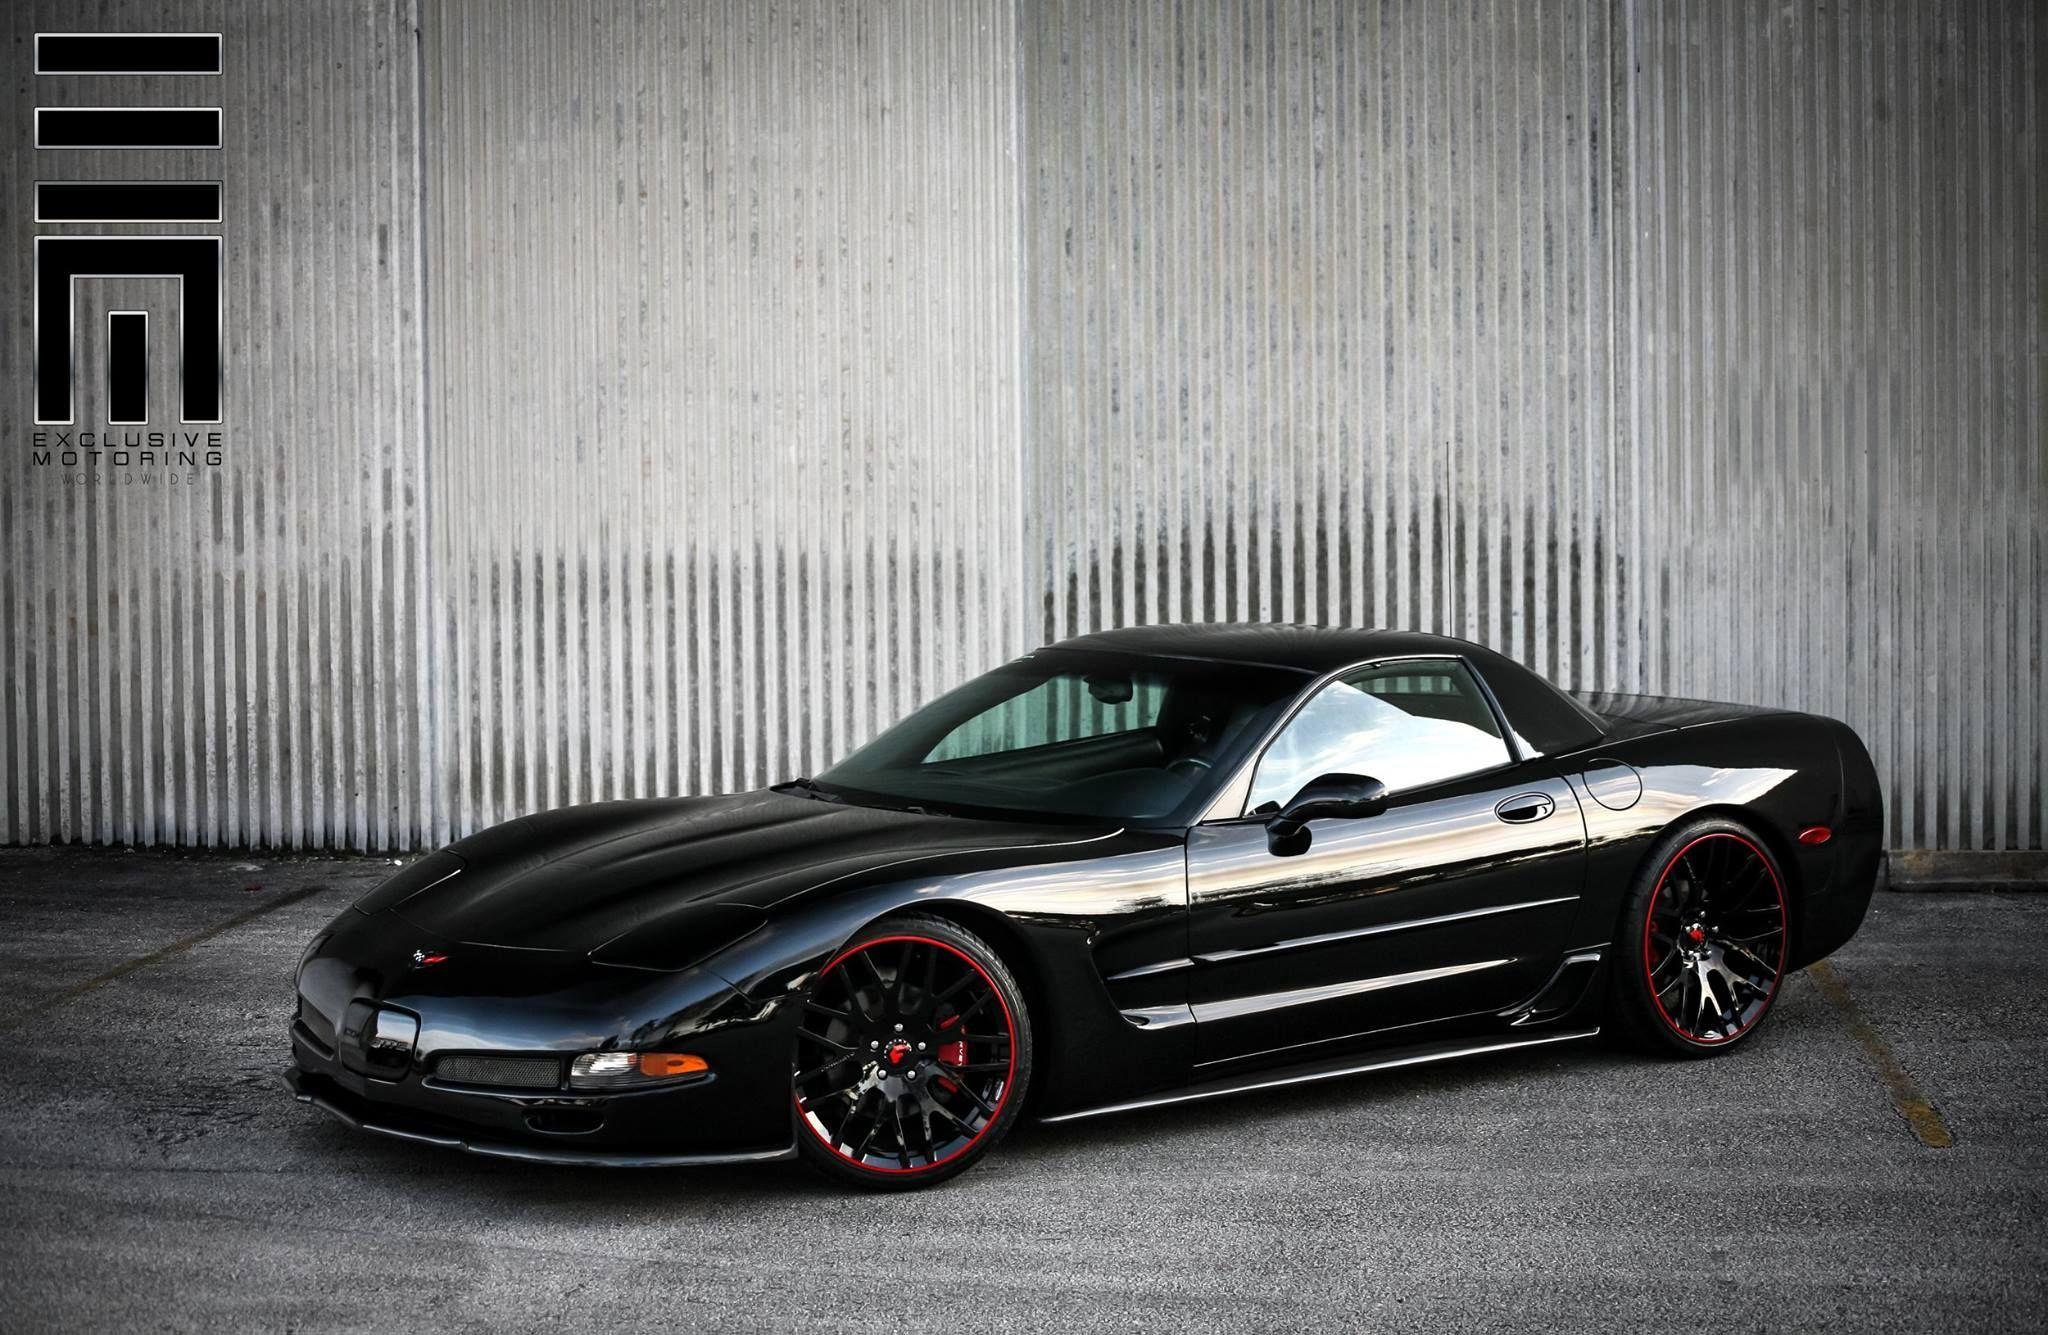 Mobile wallpaper Chevrolet Corvette C5 Chevrolet Vehicles 332932  download the picture for free